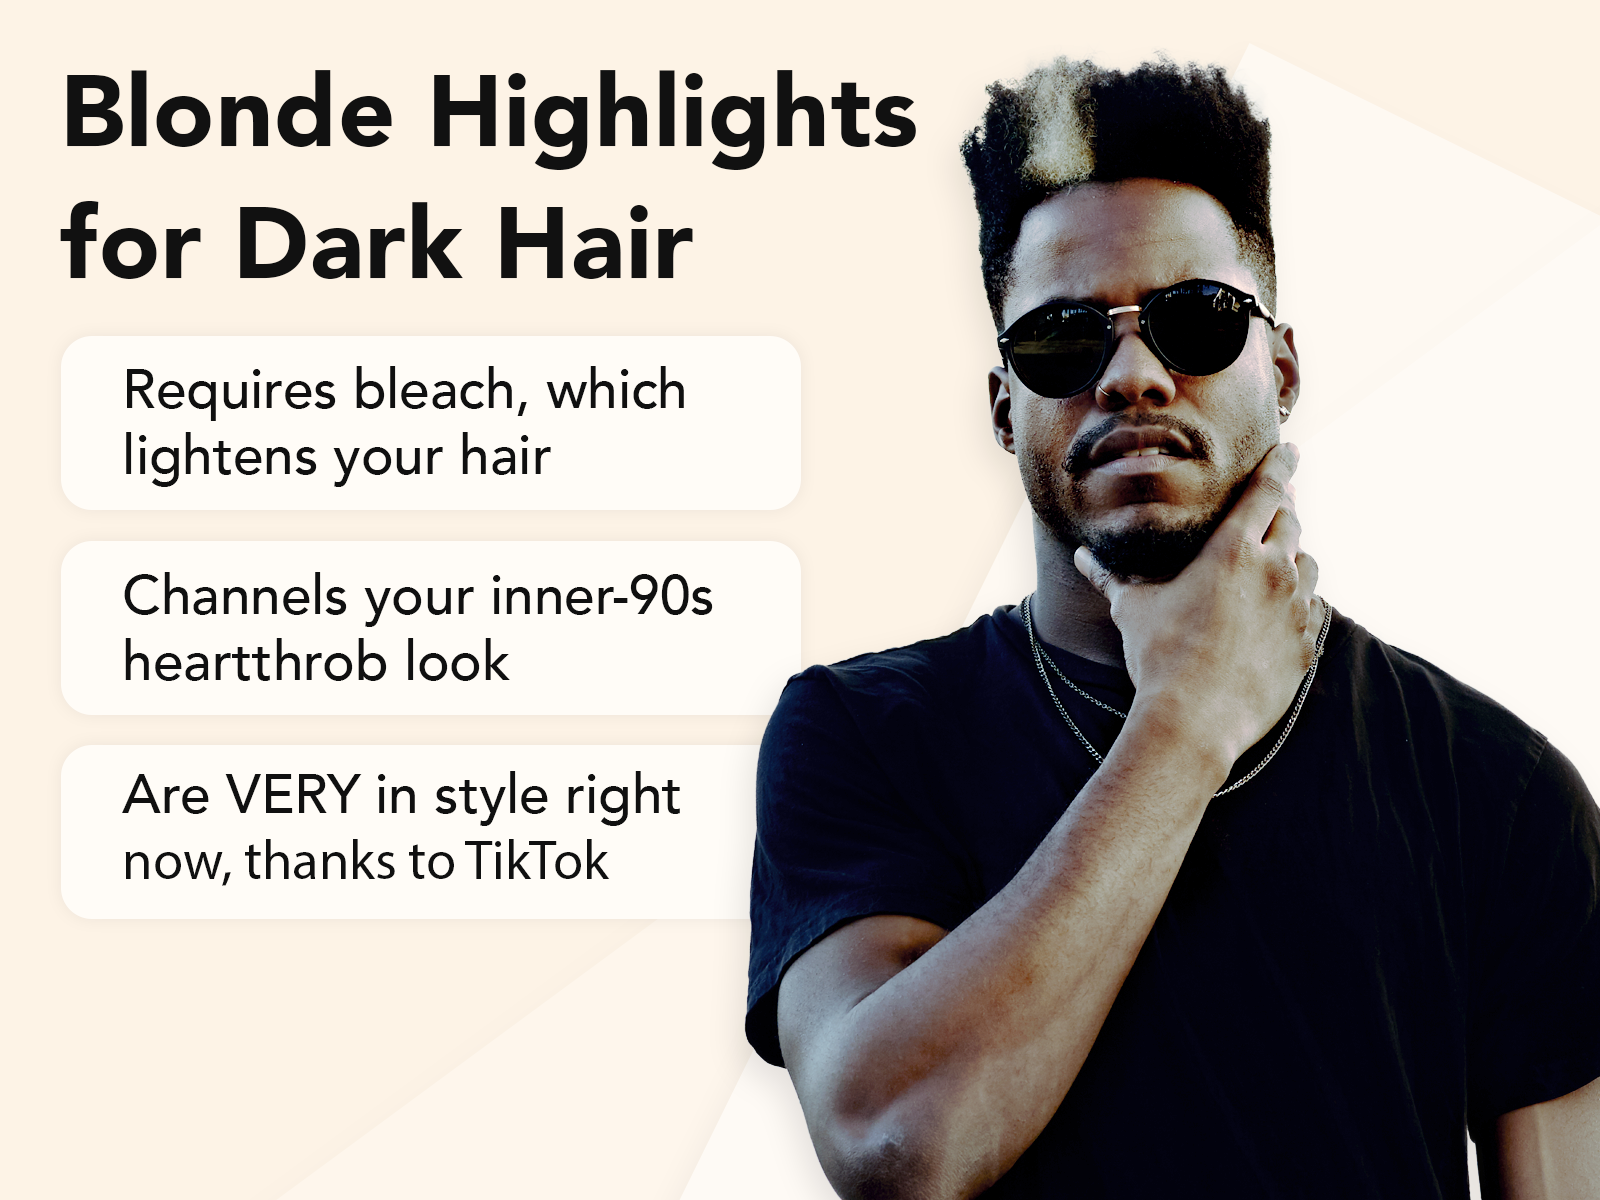 Blonde Highlights on Dark Hair Male hairstyle explainer image on a tan background